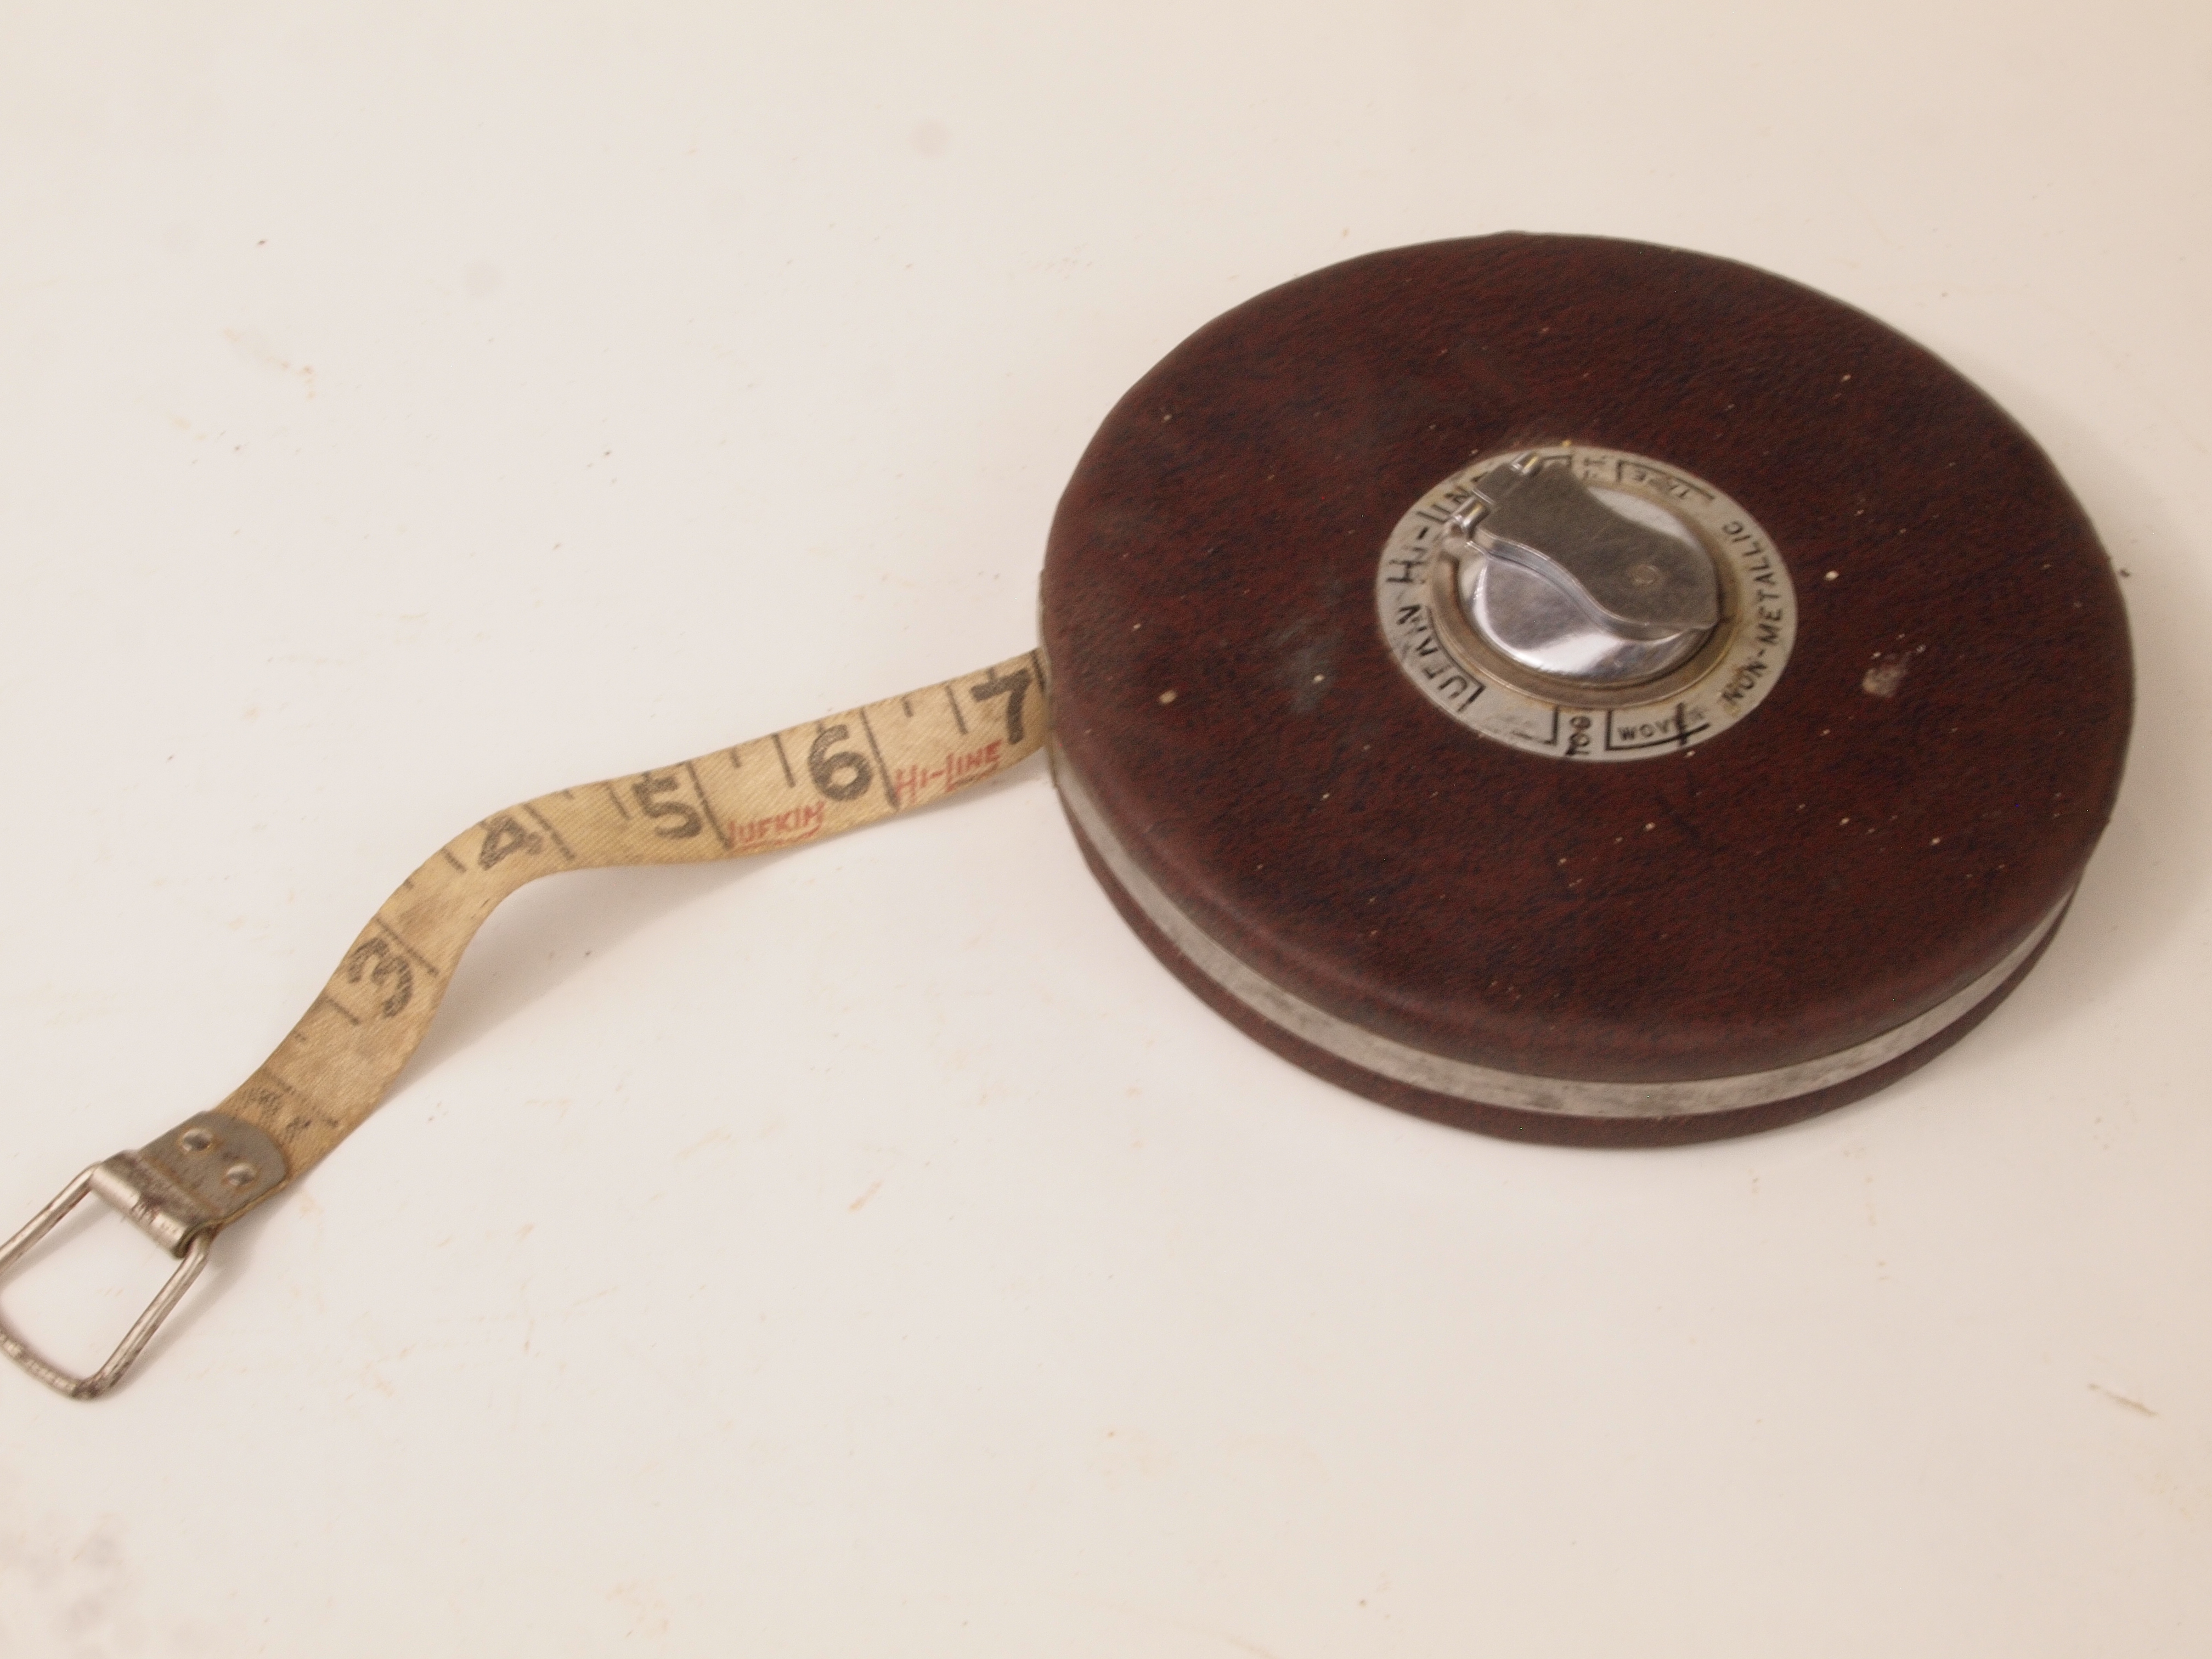 SEWACC Tools Measuring Tape Fabric Tape Measure Multipurpose Tape Measure  Measuring Tool Vintage Tape Measure Cowhide Nano-Synthetic Material Old